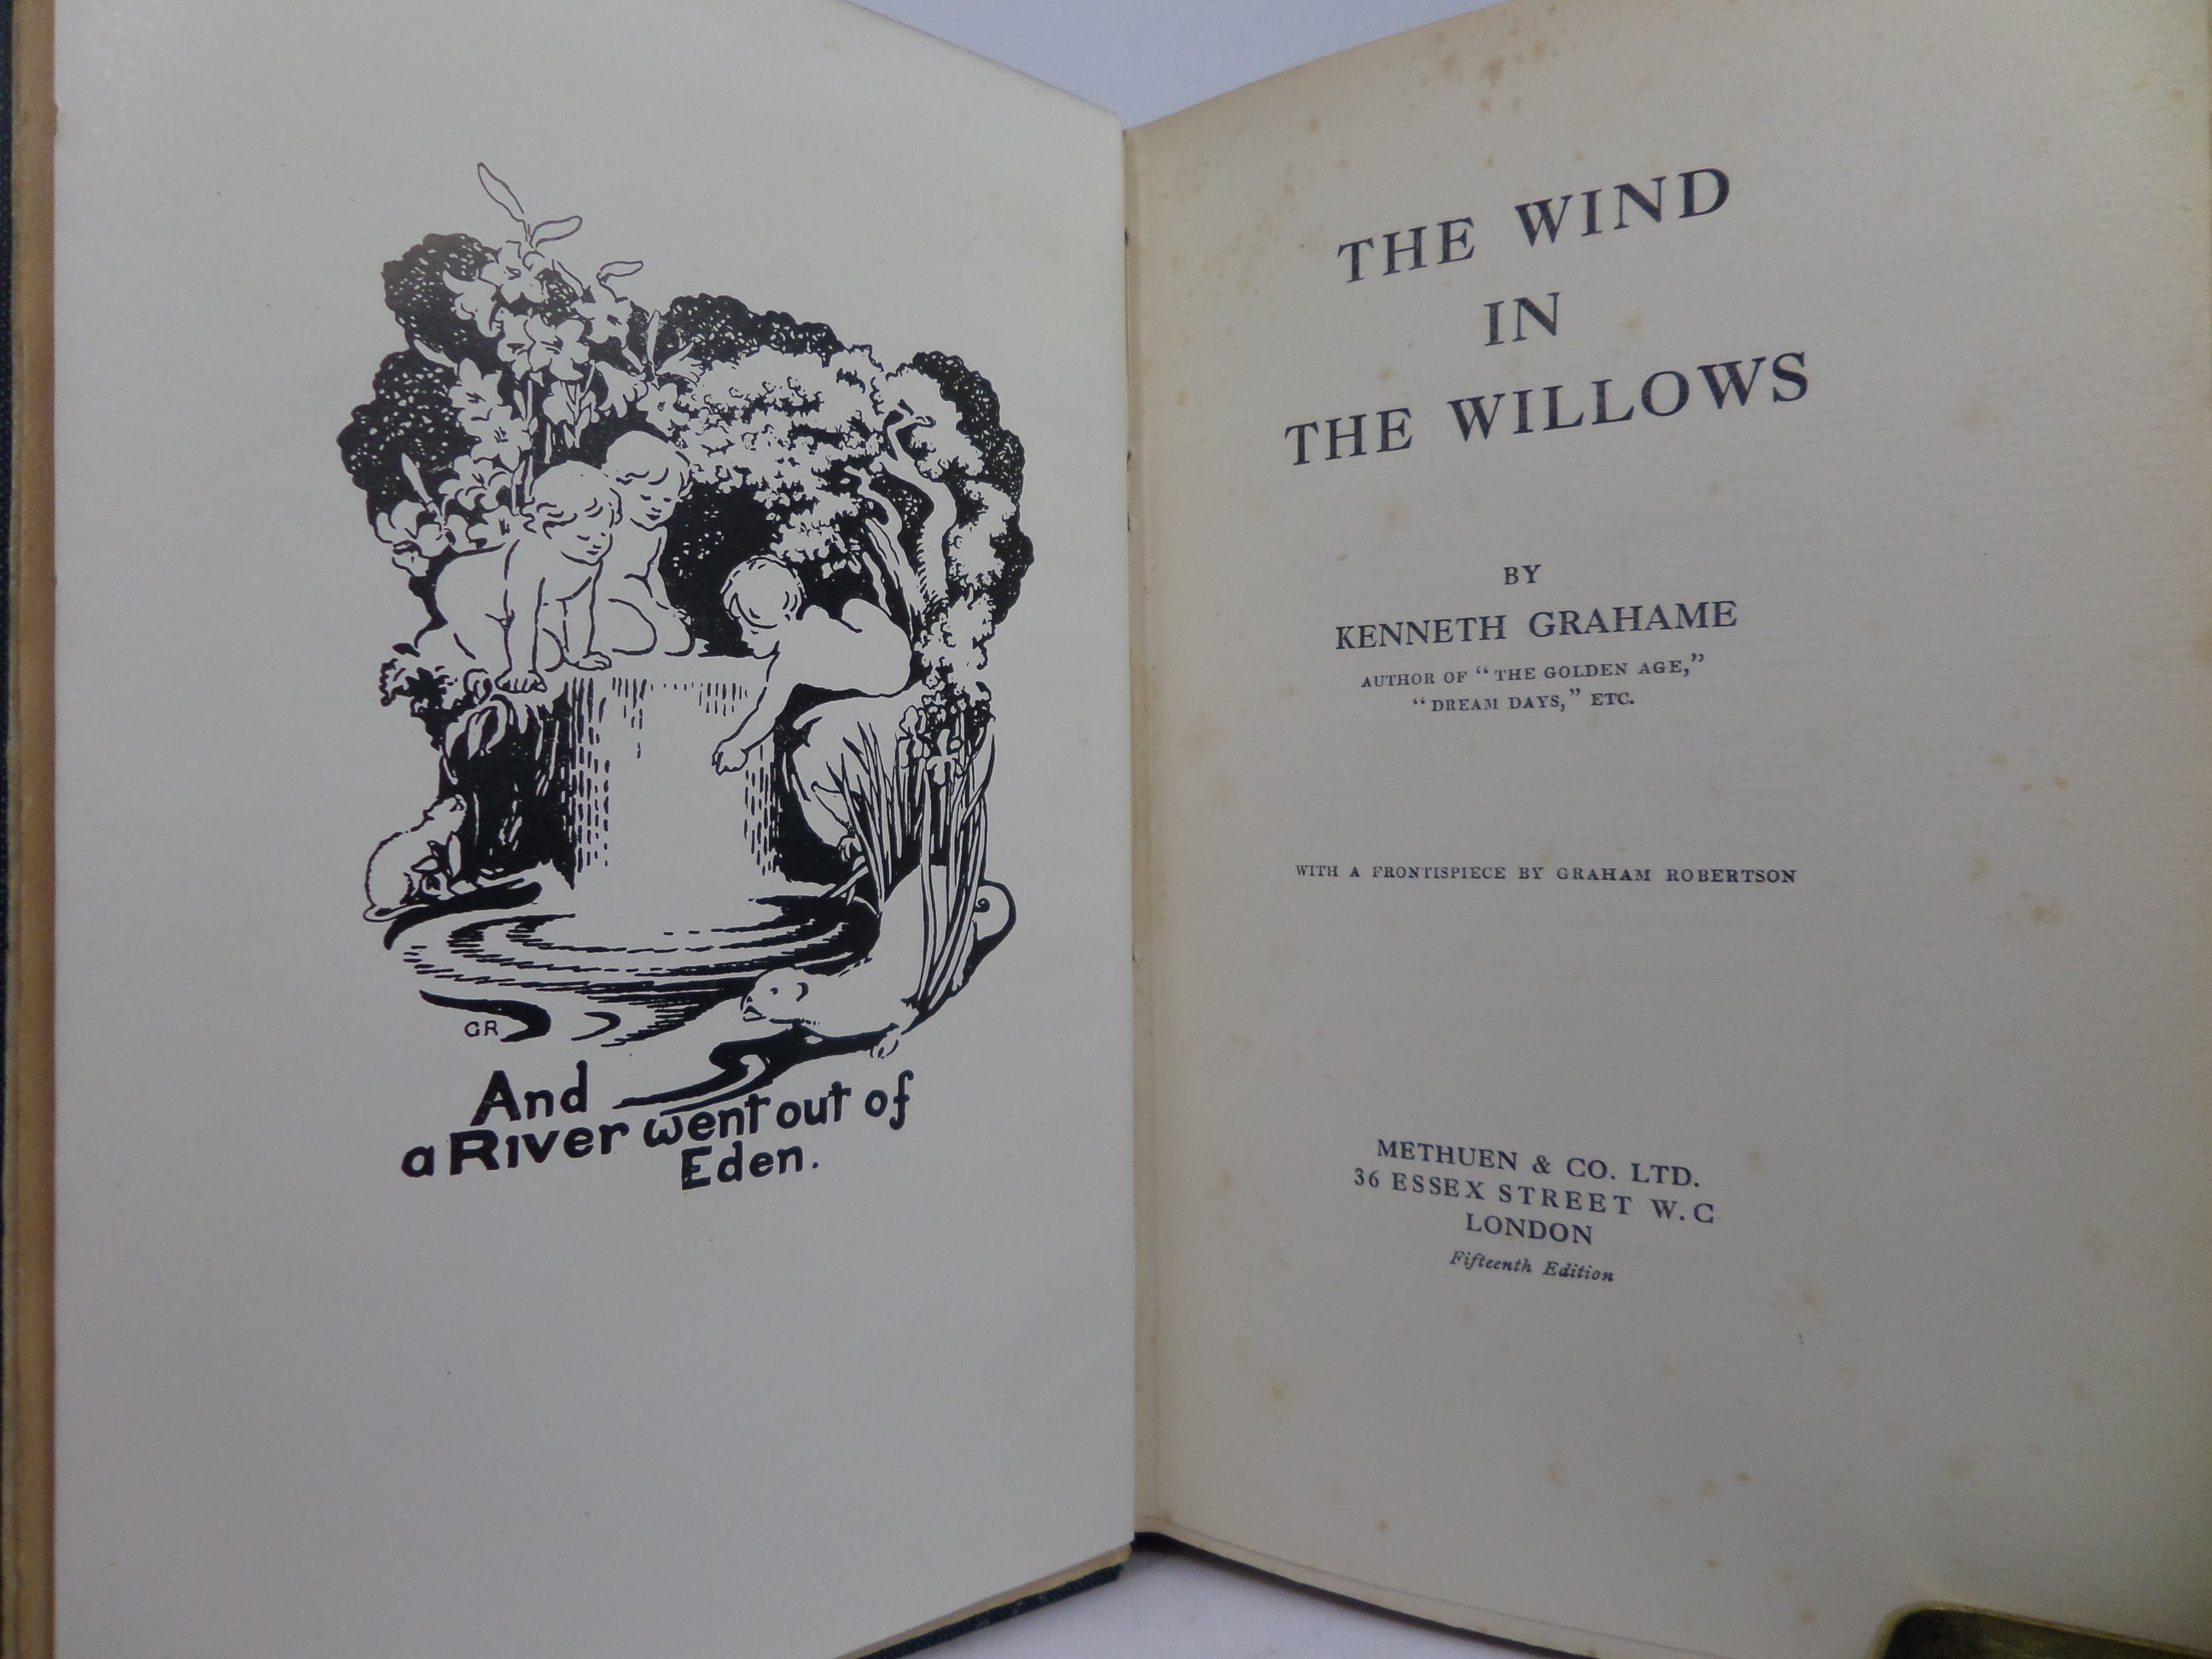 THE WIND IN THE WILLOWS BY KENNETH GRAHAME 1923 FIFTEENTH EDITION